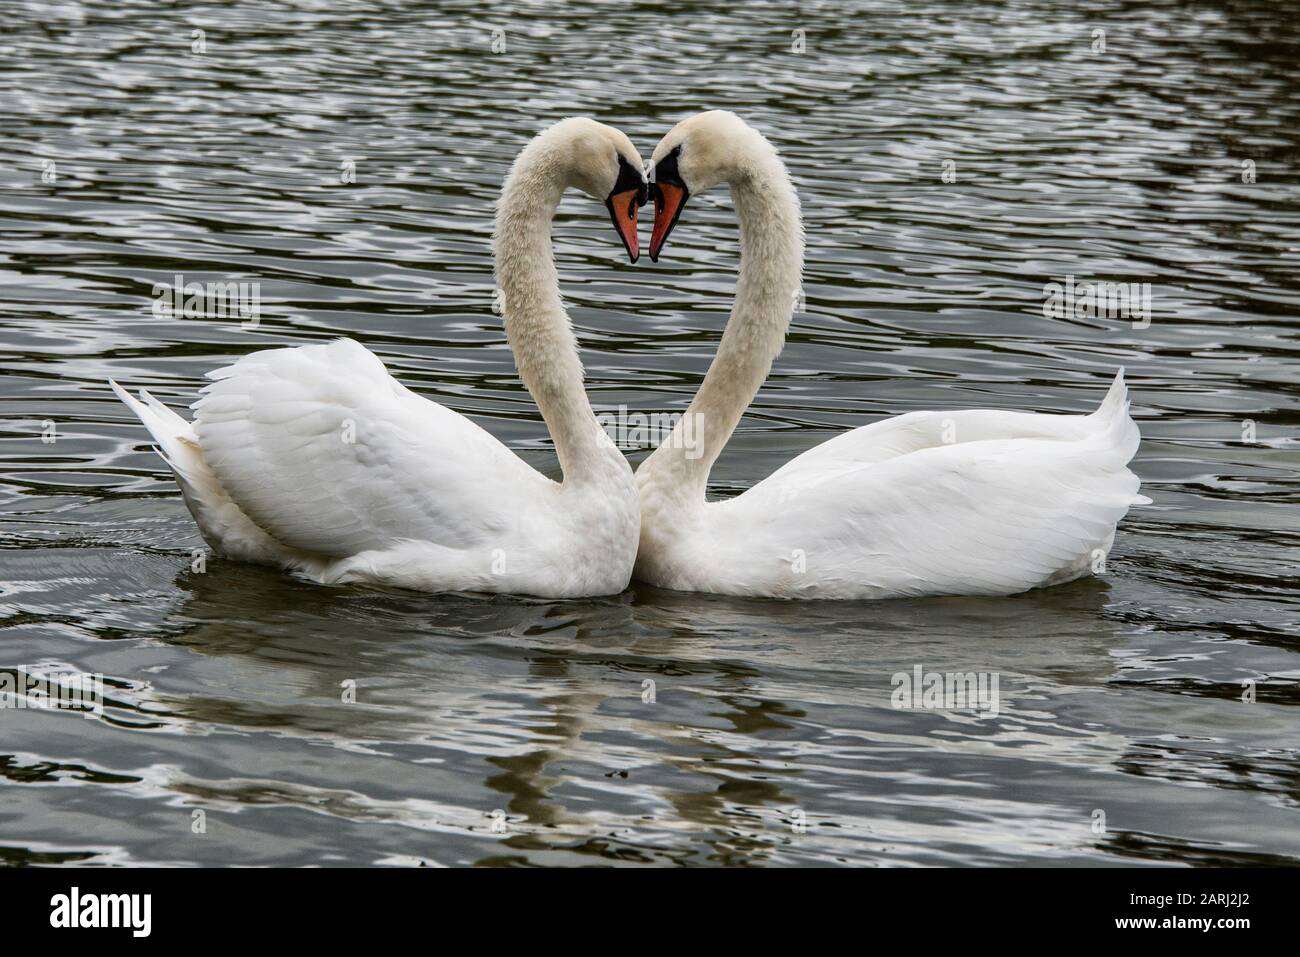 2 swans making a heart